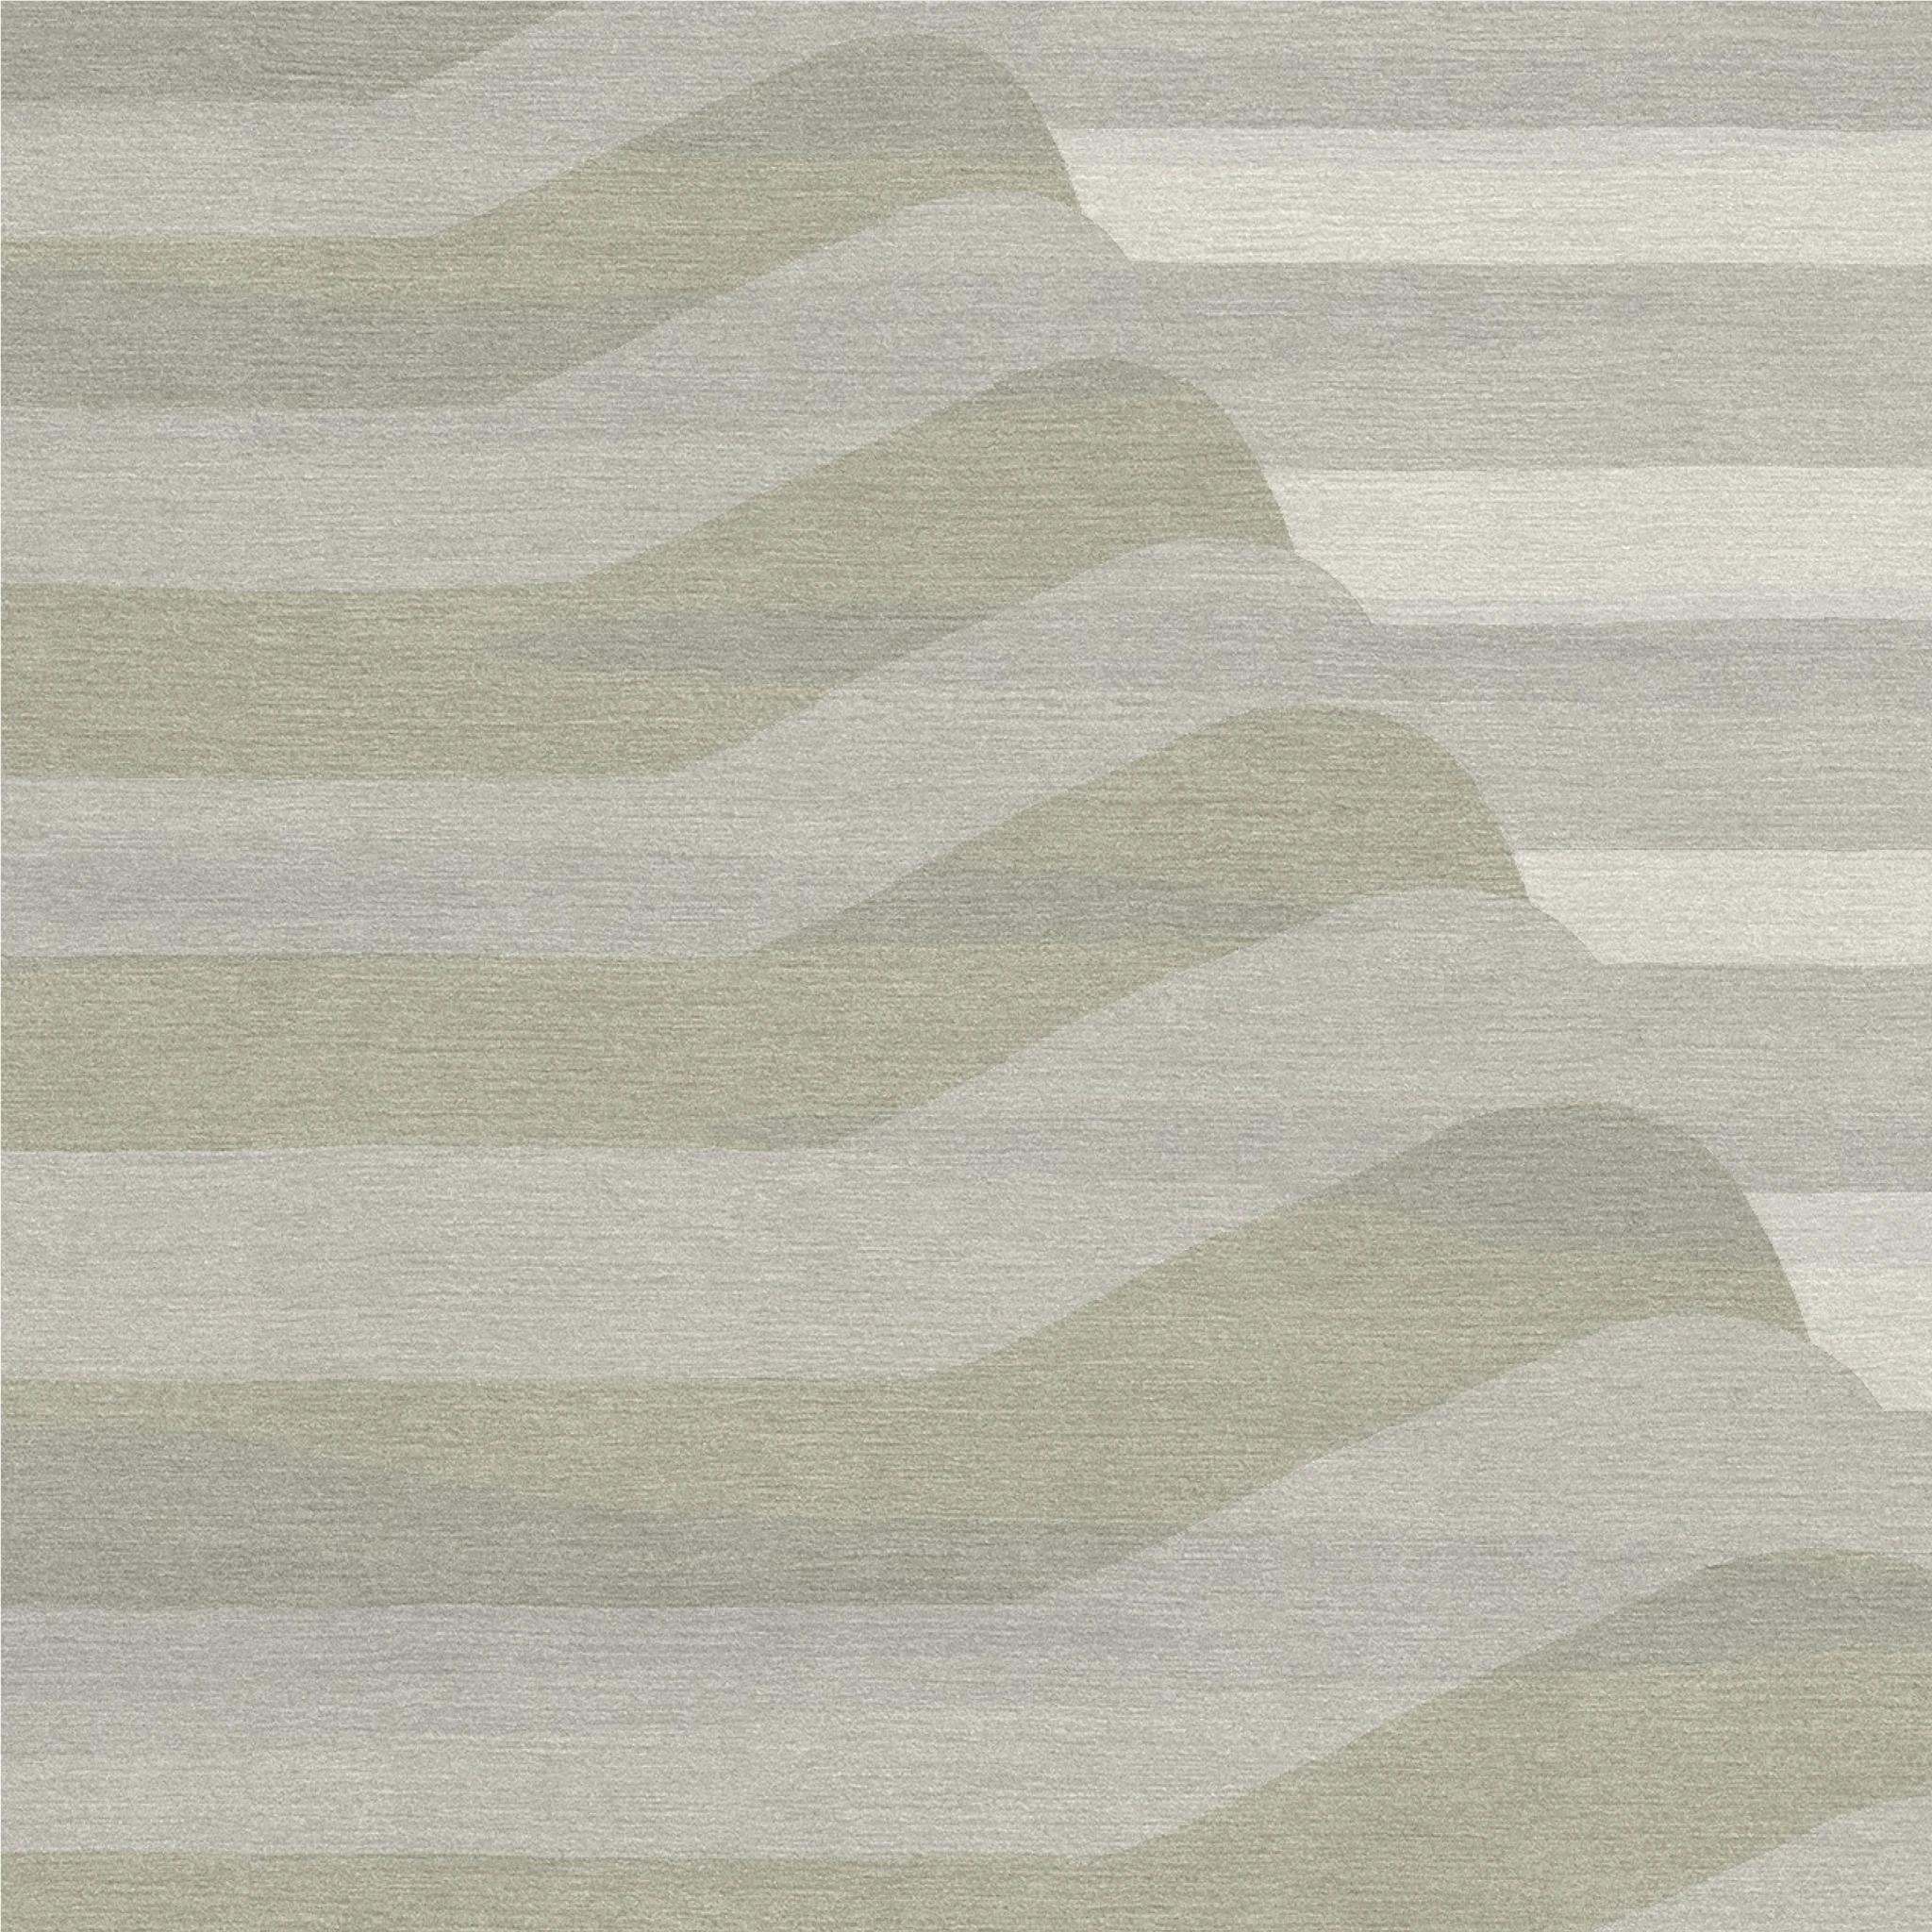 An exquisite piece from the 'Piega' (Italian word for 'crease') collection of rugs designed by architect and designer Giulio Brambilla, this rug will infuse any modern or traditional home with timeless, mid-century style elegance and neutral tones.